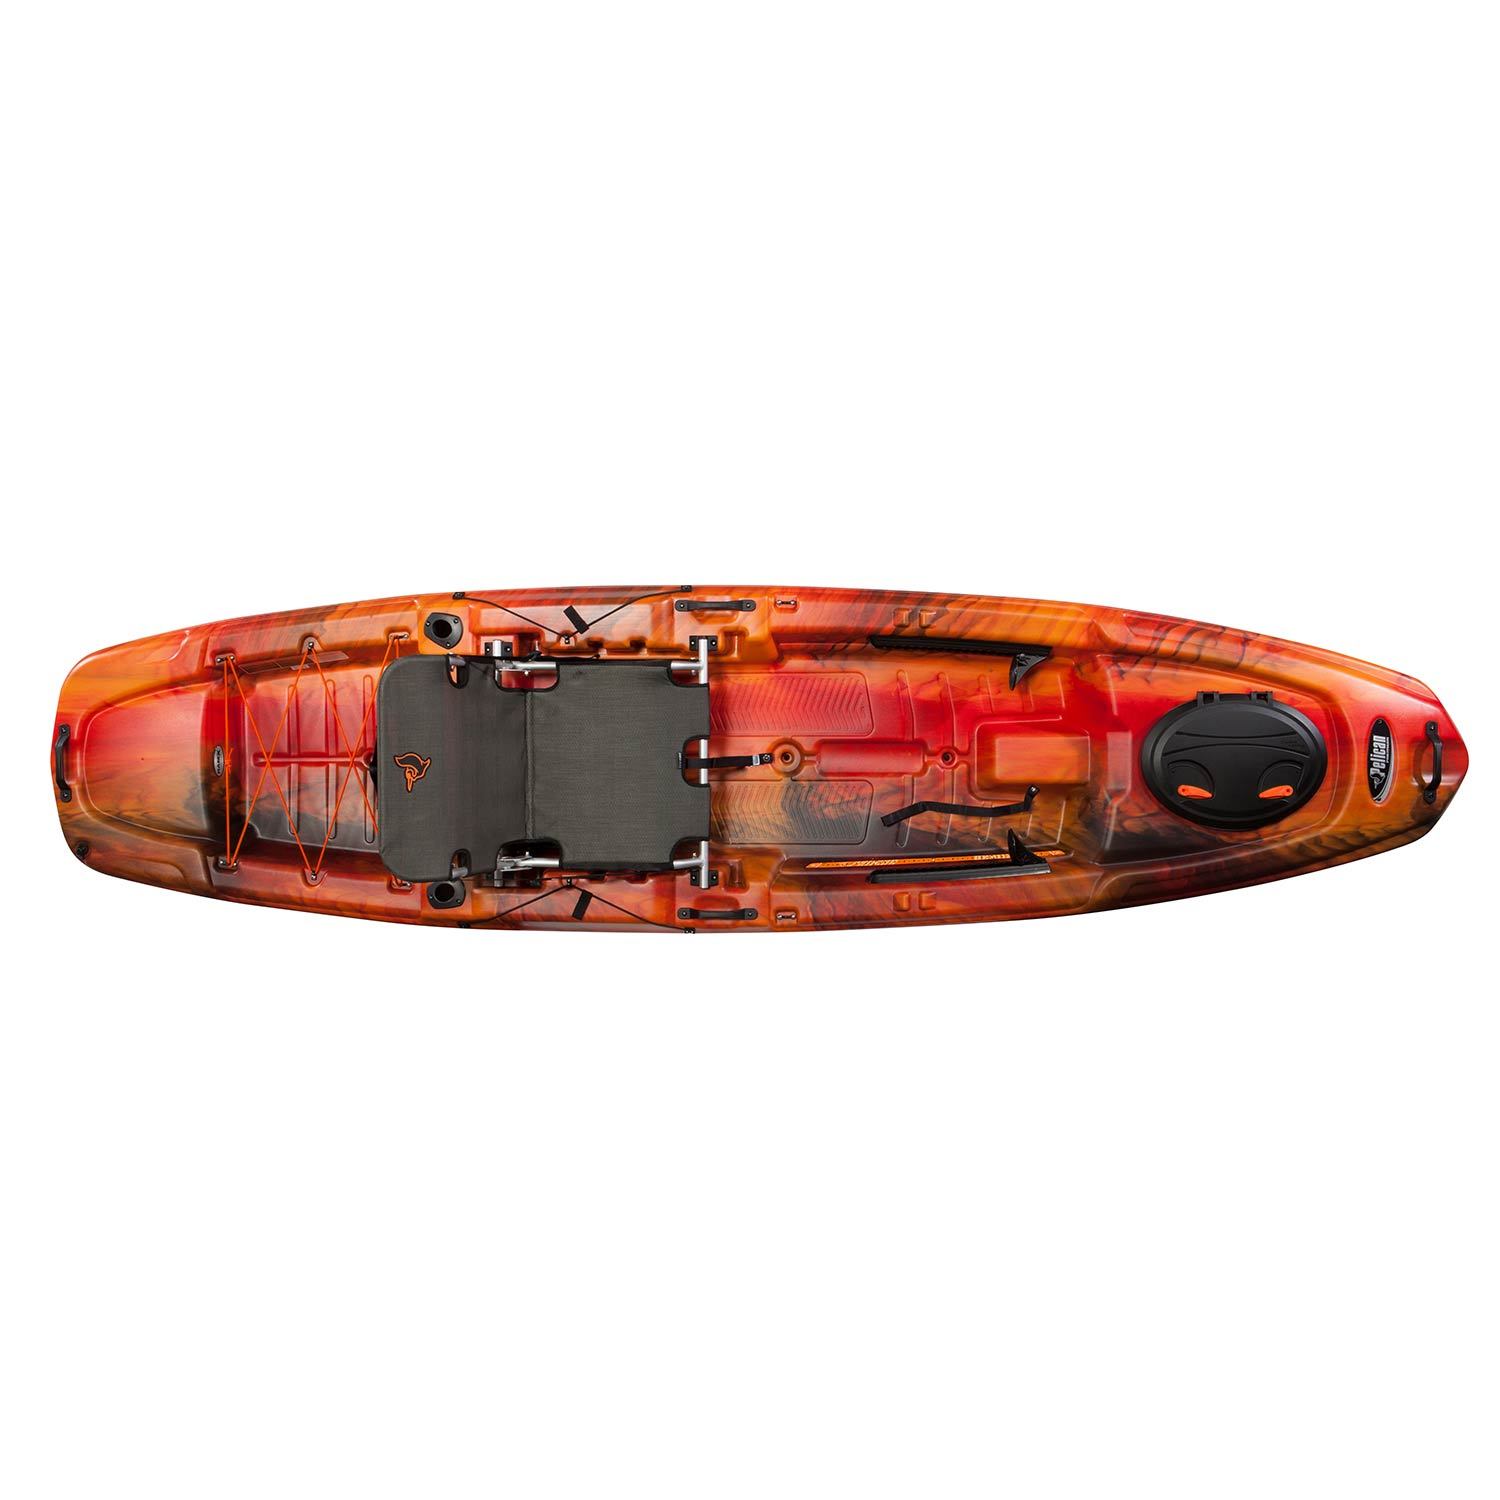 The Catch 120 Sit-On-Top Angler Kayak